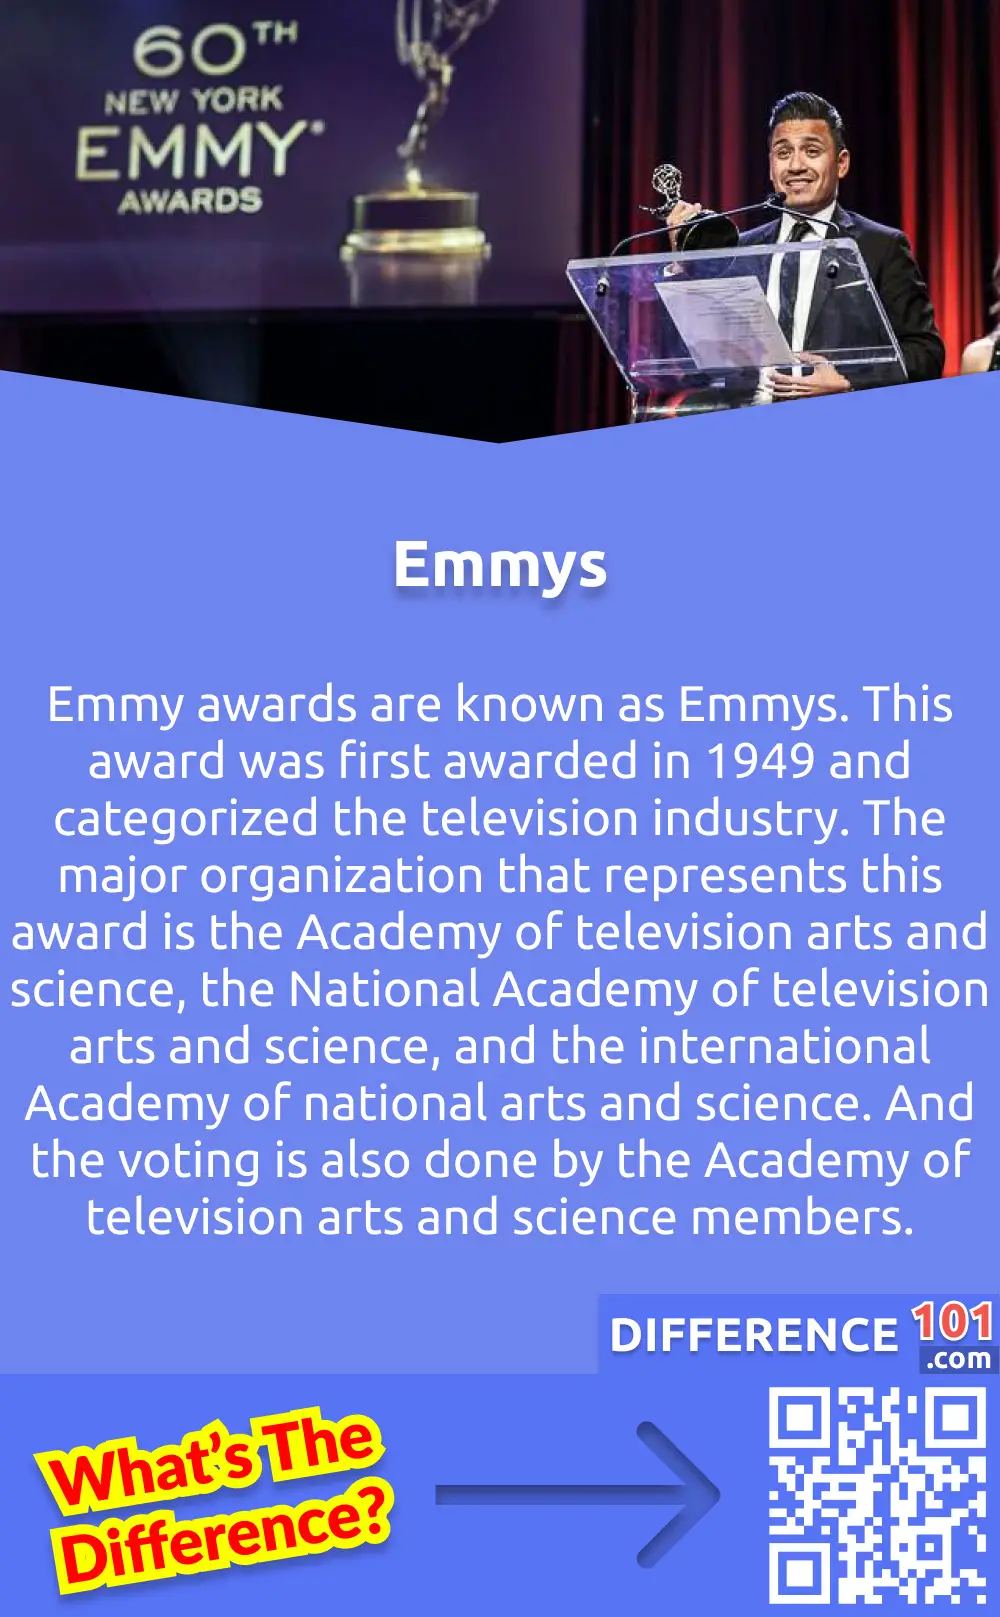 What Is Emmys? Emmy awards are known as Emmys. This award was first awarded in 1949 and categorized the television industry. The major organization that represents this award is the Academy of television arts and science, the National Academy of television arts and science, and the international Academy of national arts and science. And the voting is also done by the Academy of television arts and science members.